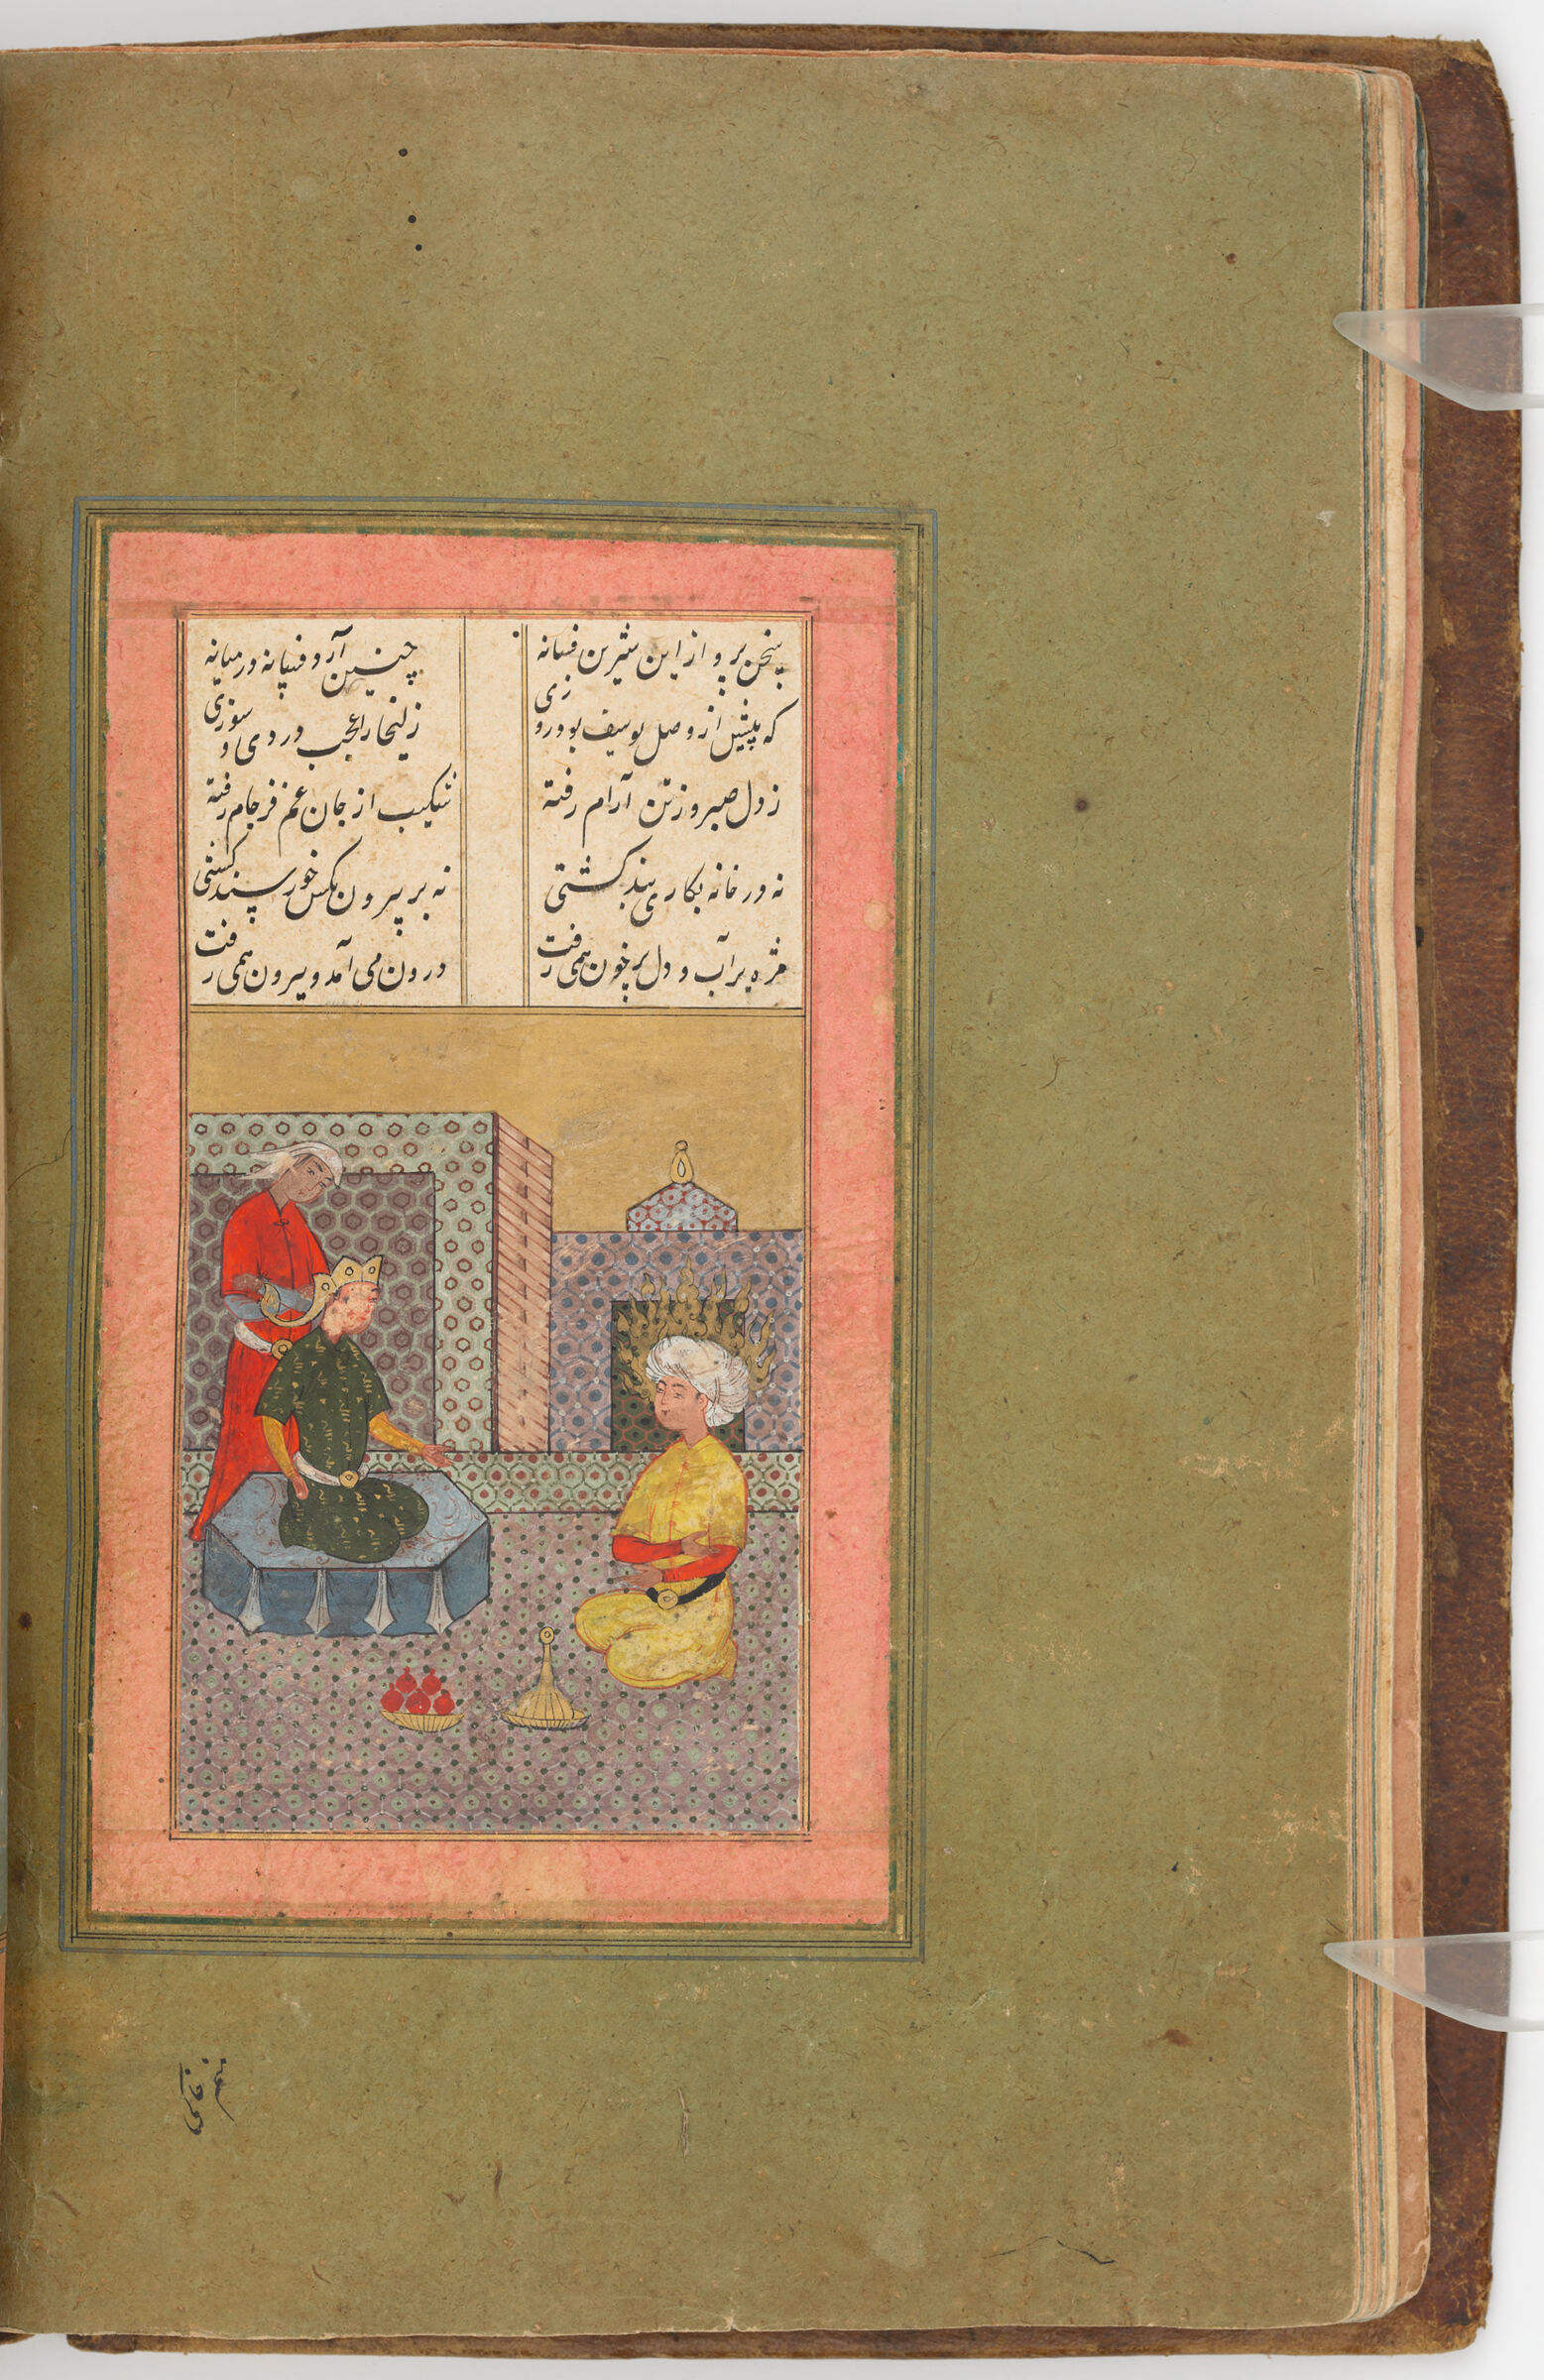 Yusuf Tells His Story (Text Recto; Painting Verso Of Folio 64); Illustrated Folio From A Manuscript Of Yusuf And Zulaykha By Nizami